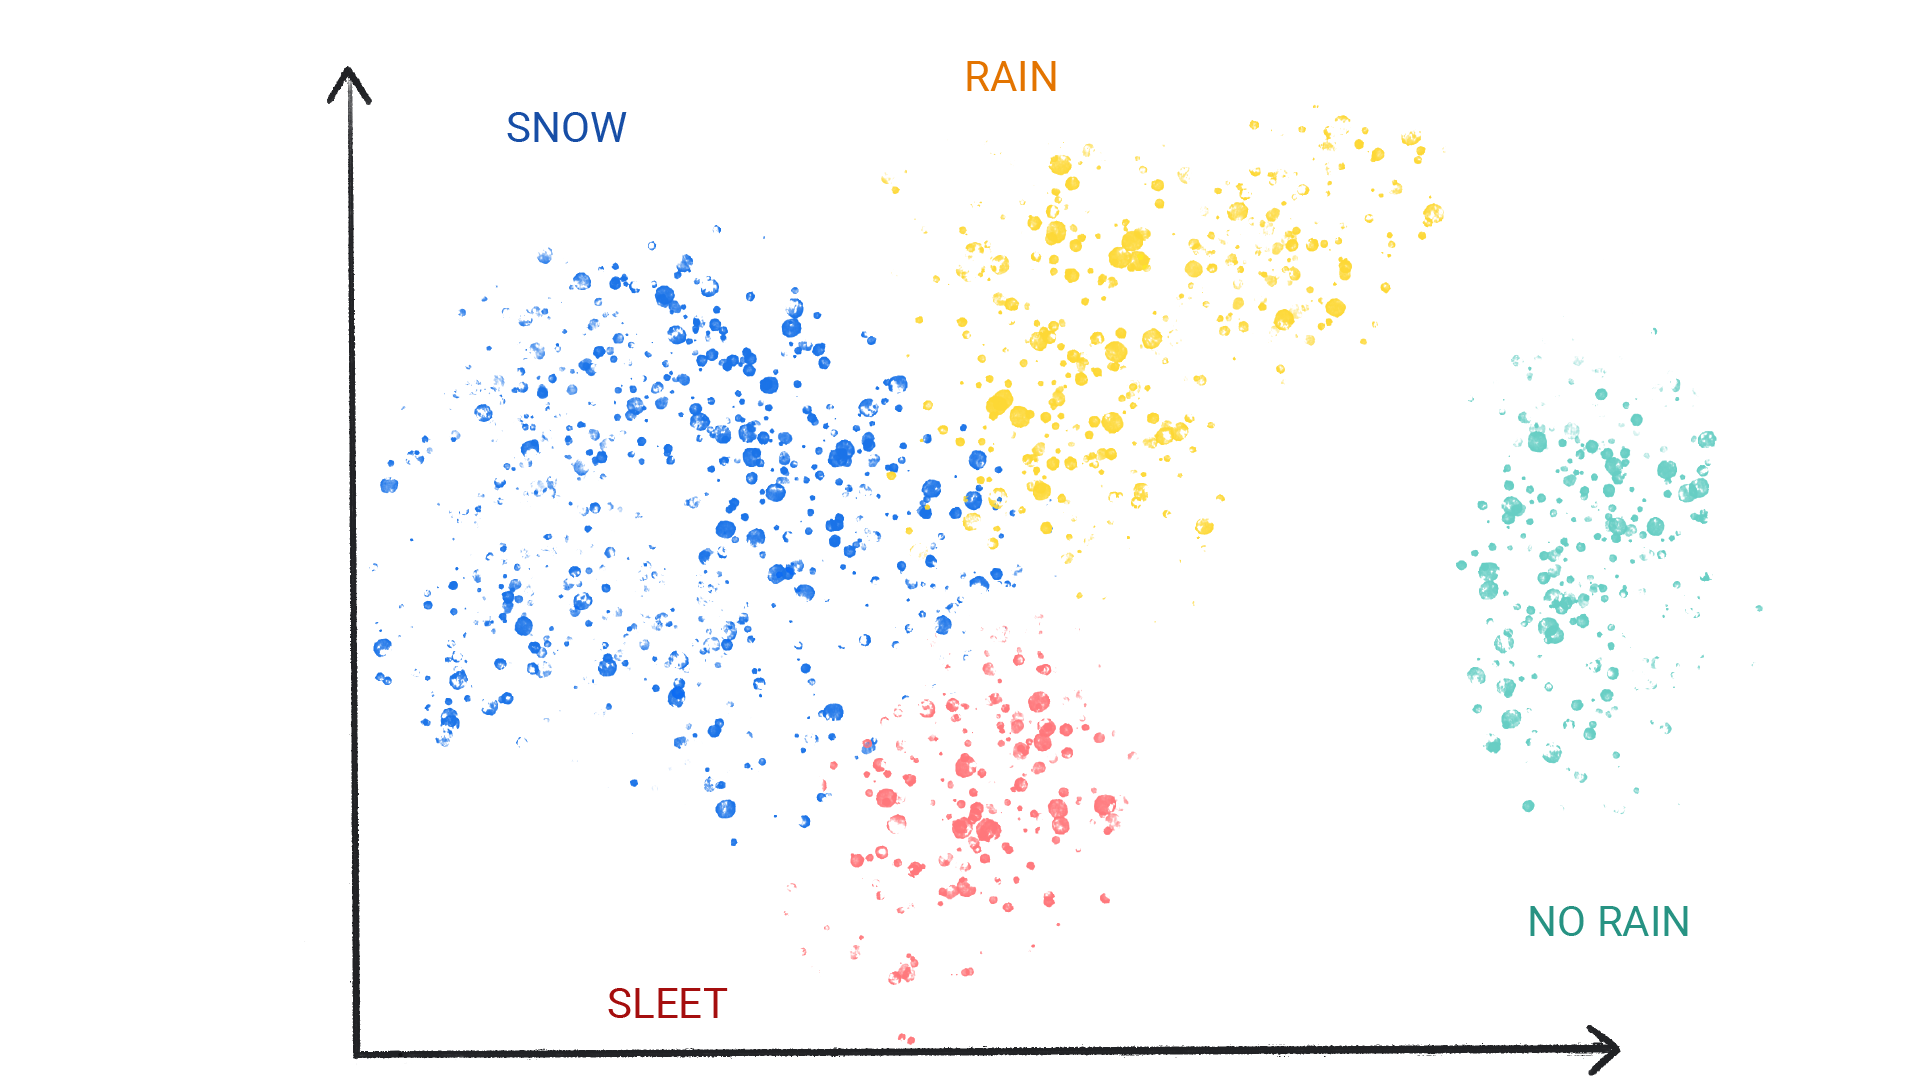 An image showing colored dots in clusters that are labeled as snow, rain, hail, and no rain.